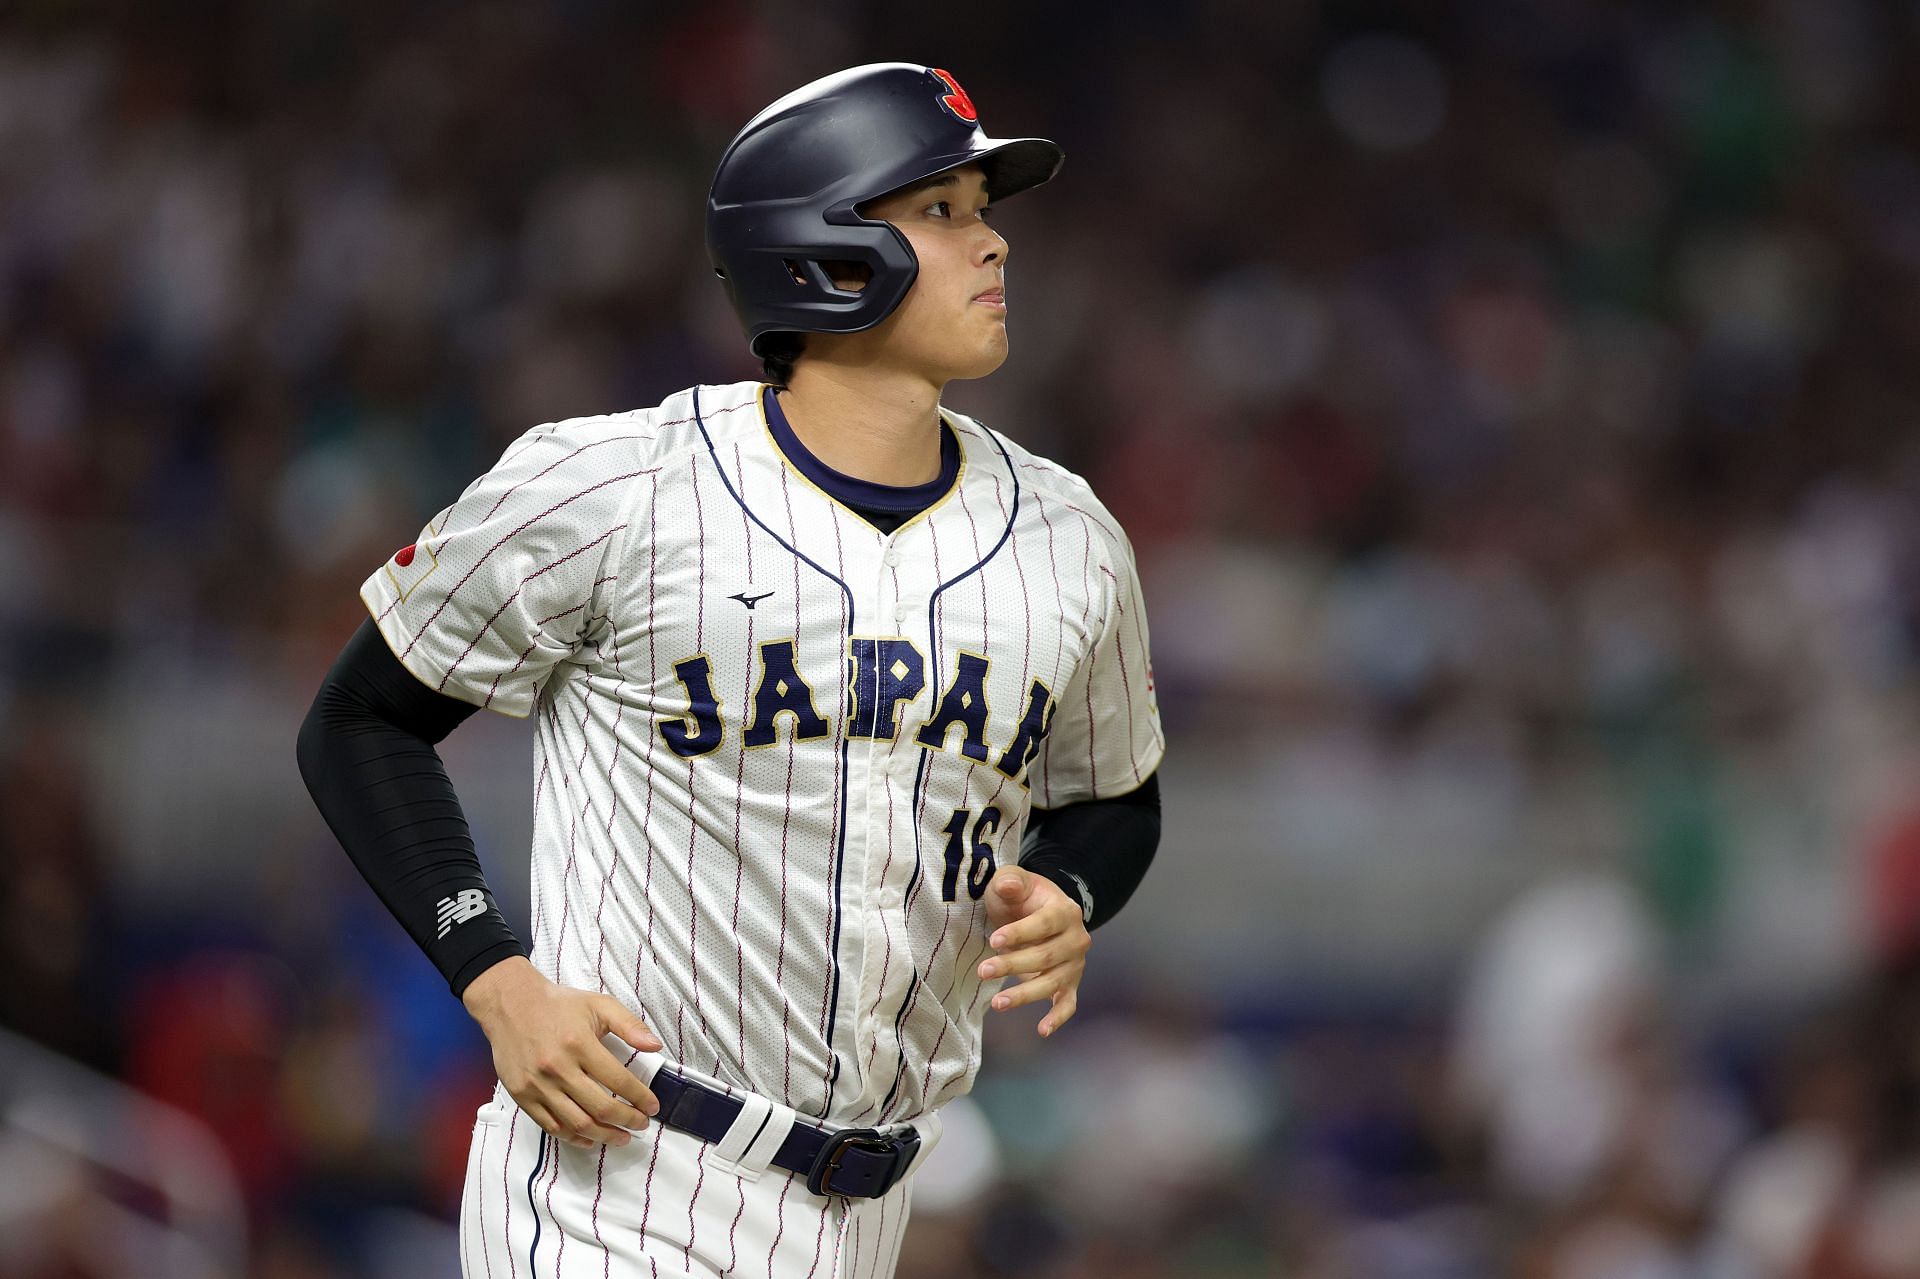 Shohei Ohtani available to pitch for Japan against Team USA in